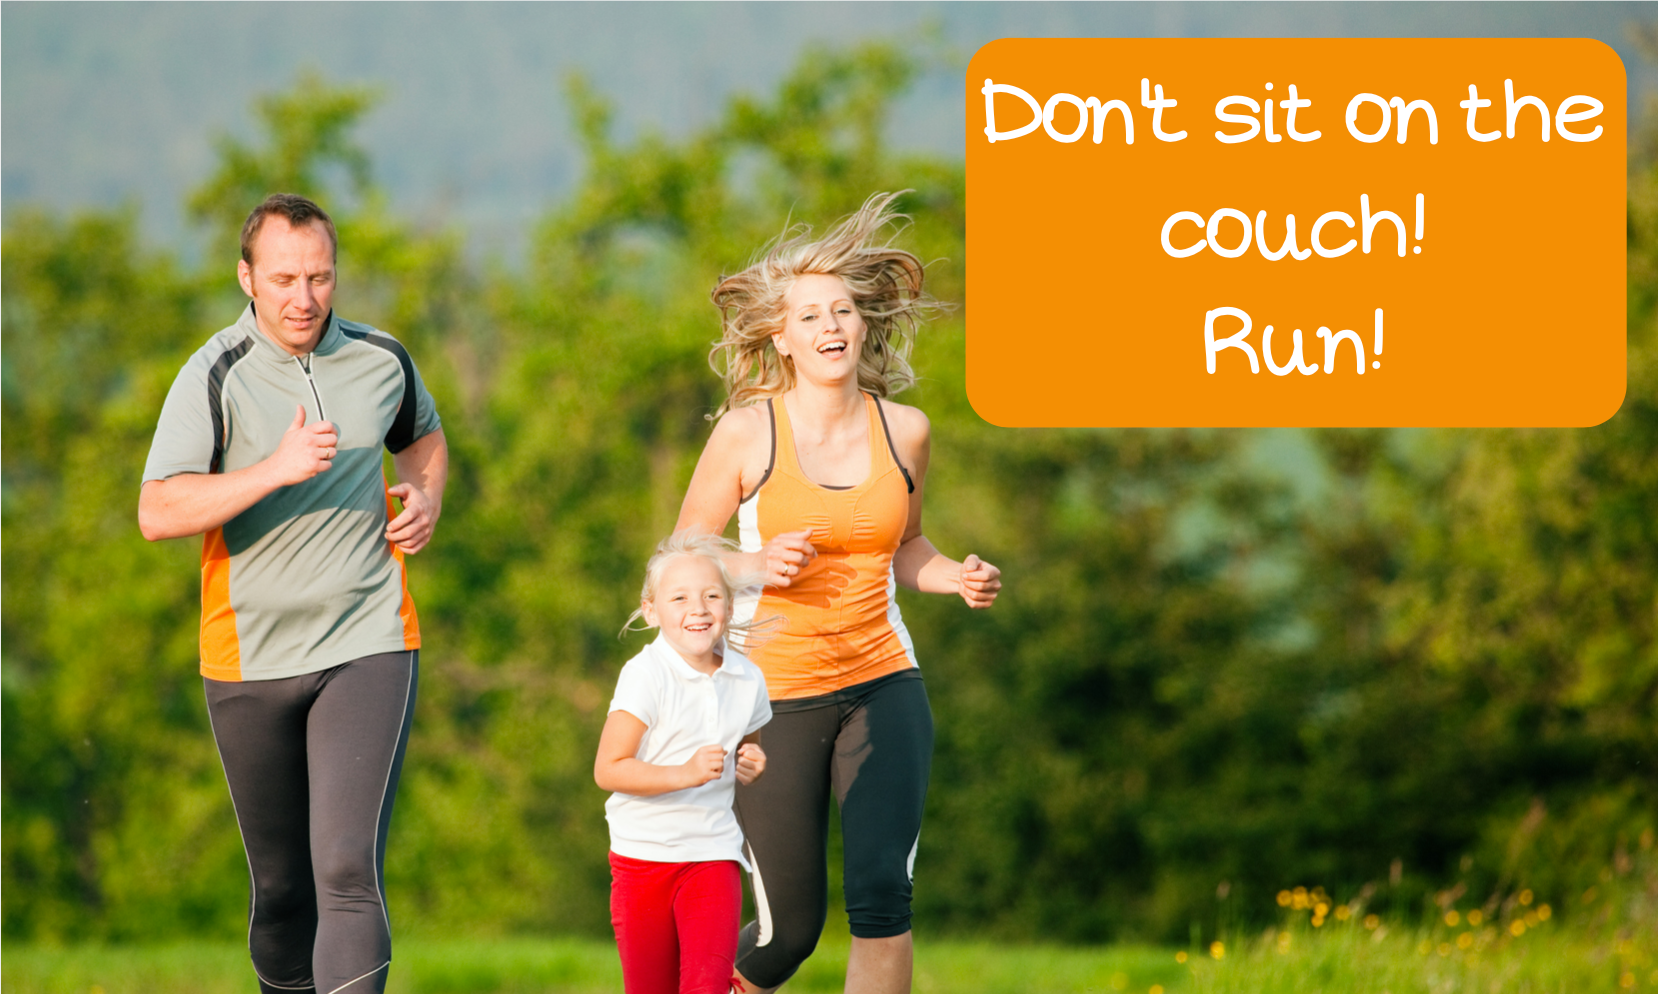 Are you a cancer survivor? Don’t sit on the couch, run!